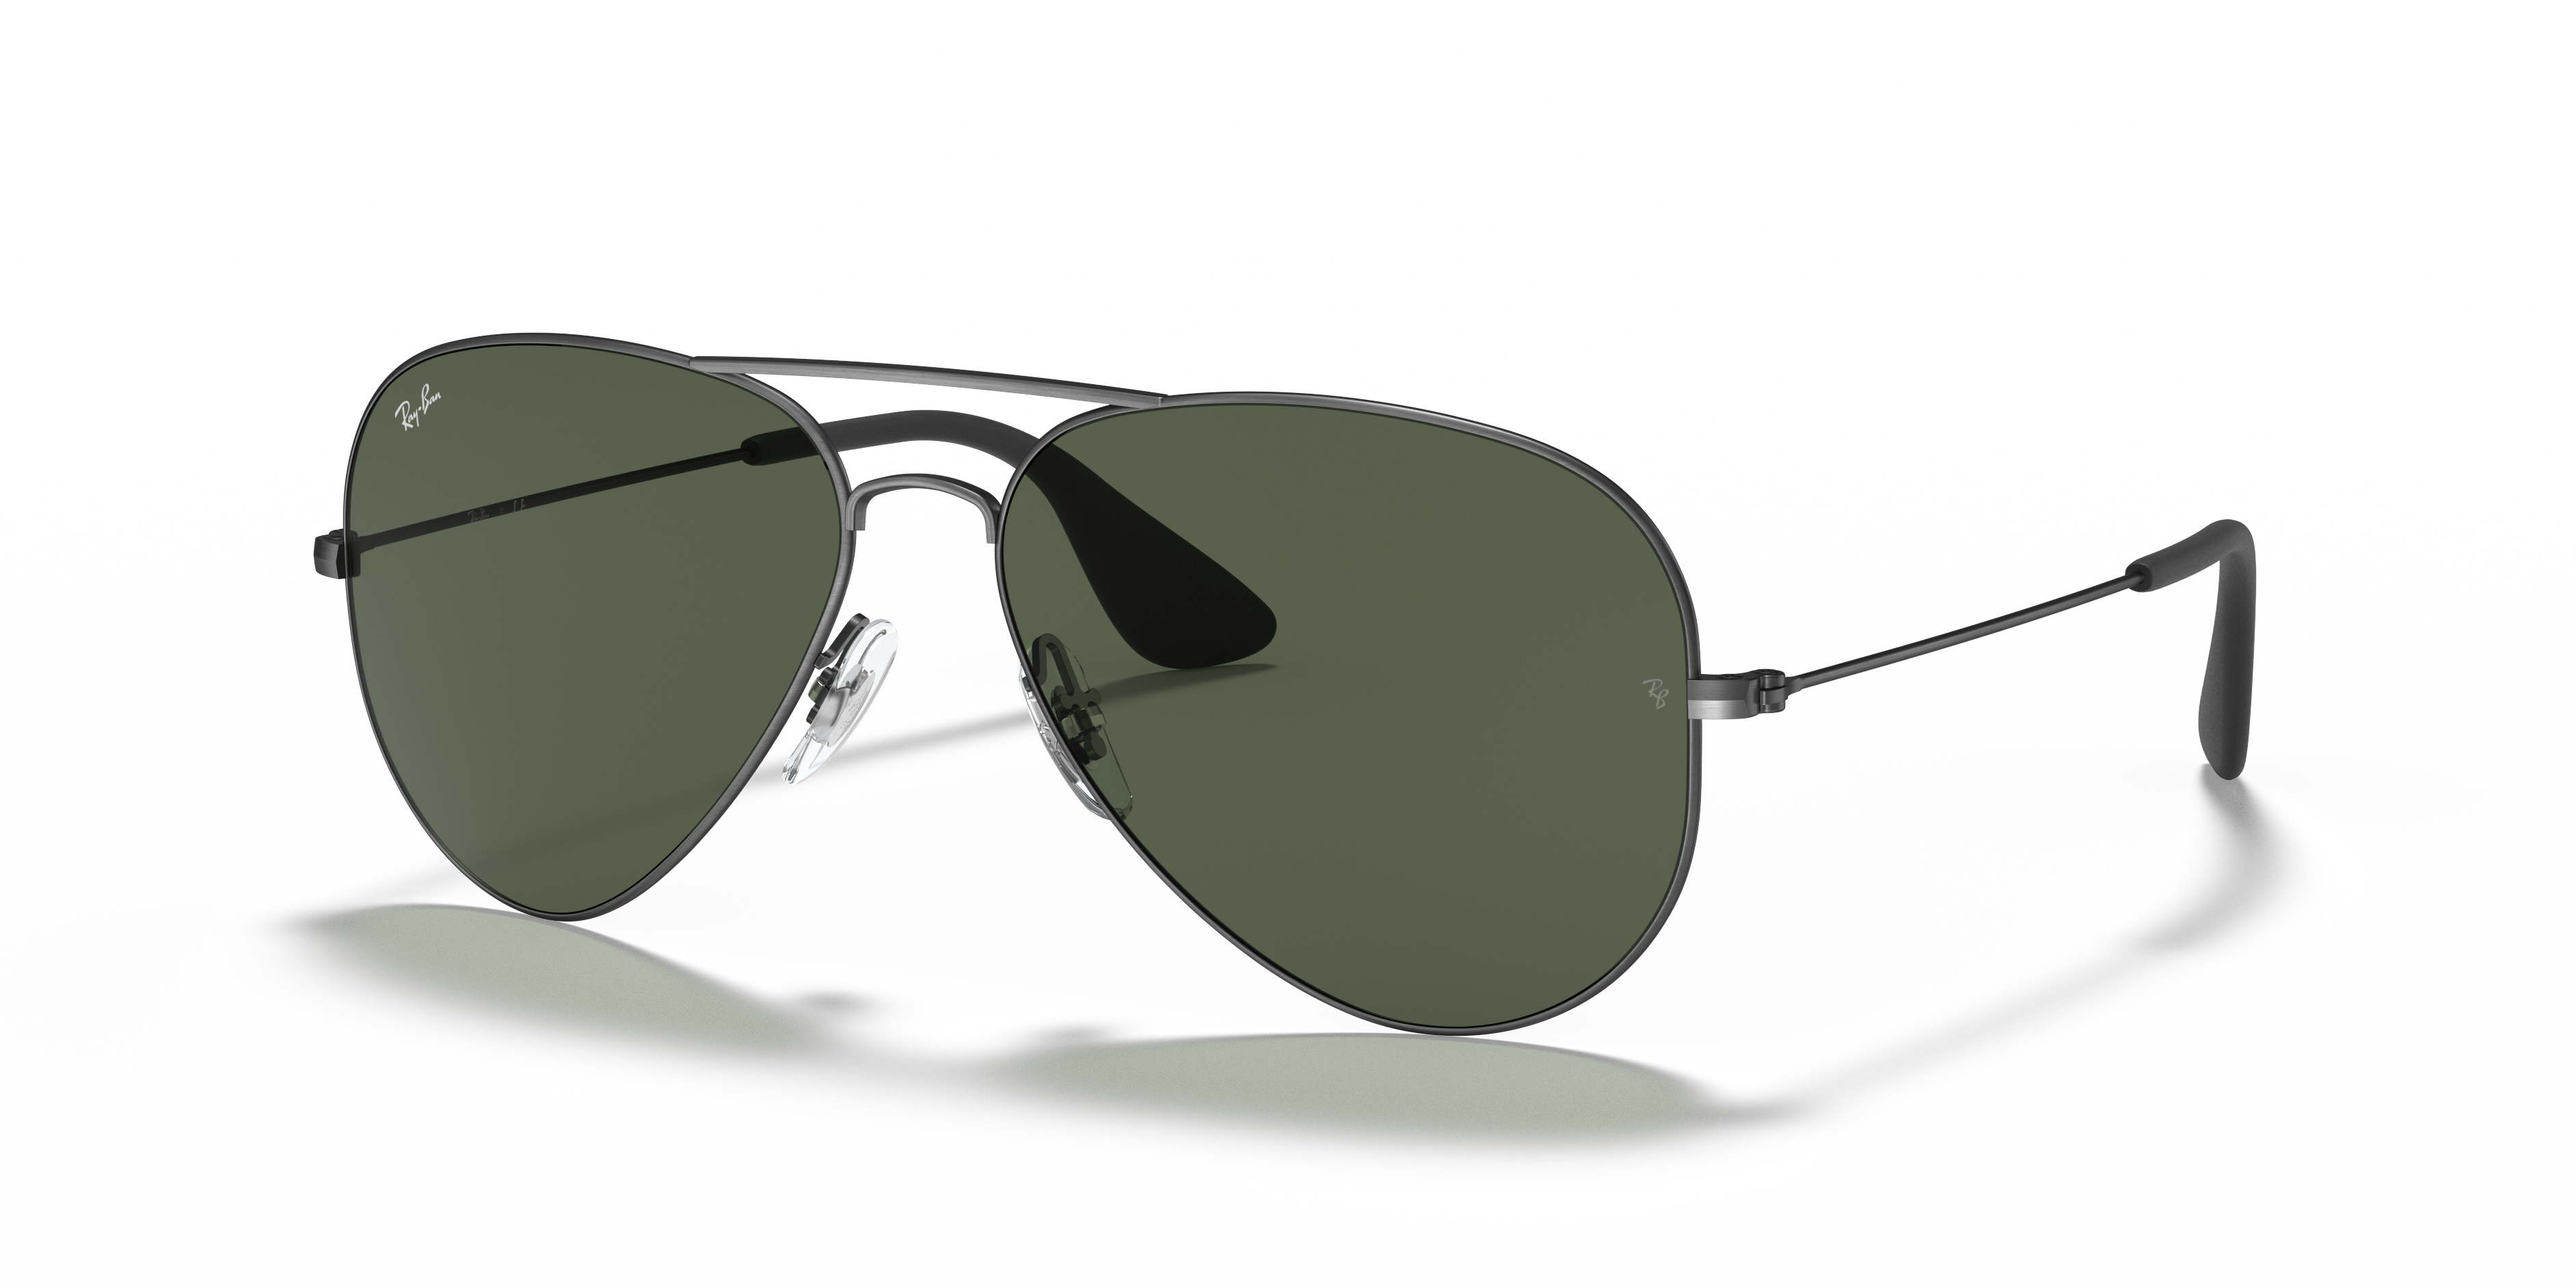 RB3558 Sunglasses in Black and Dark Green - RB3558 | Ray-Ban® US